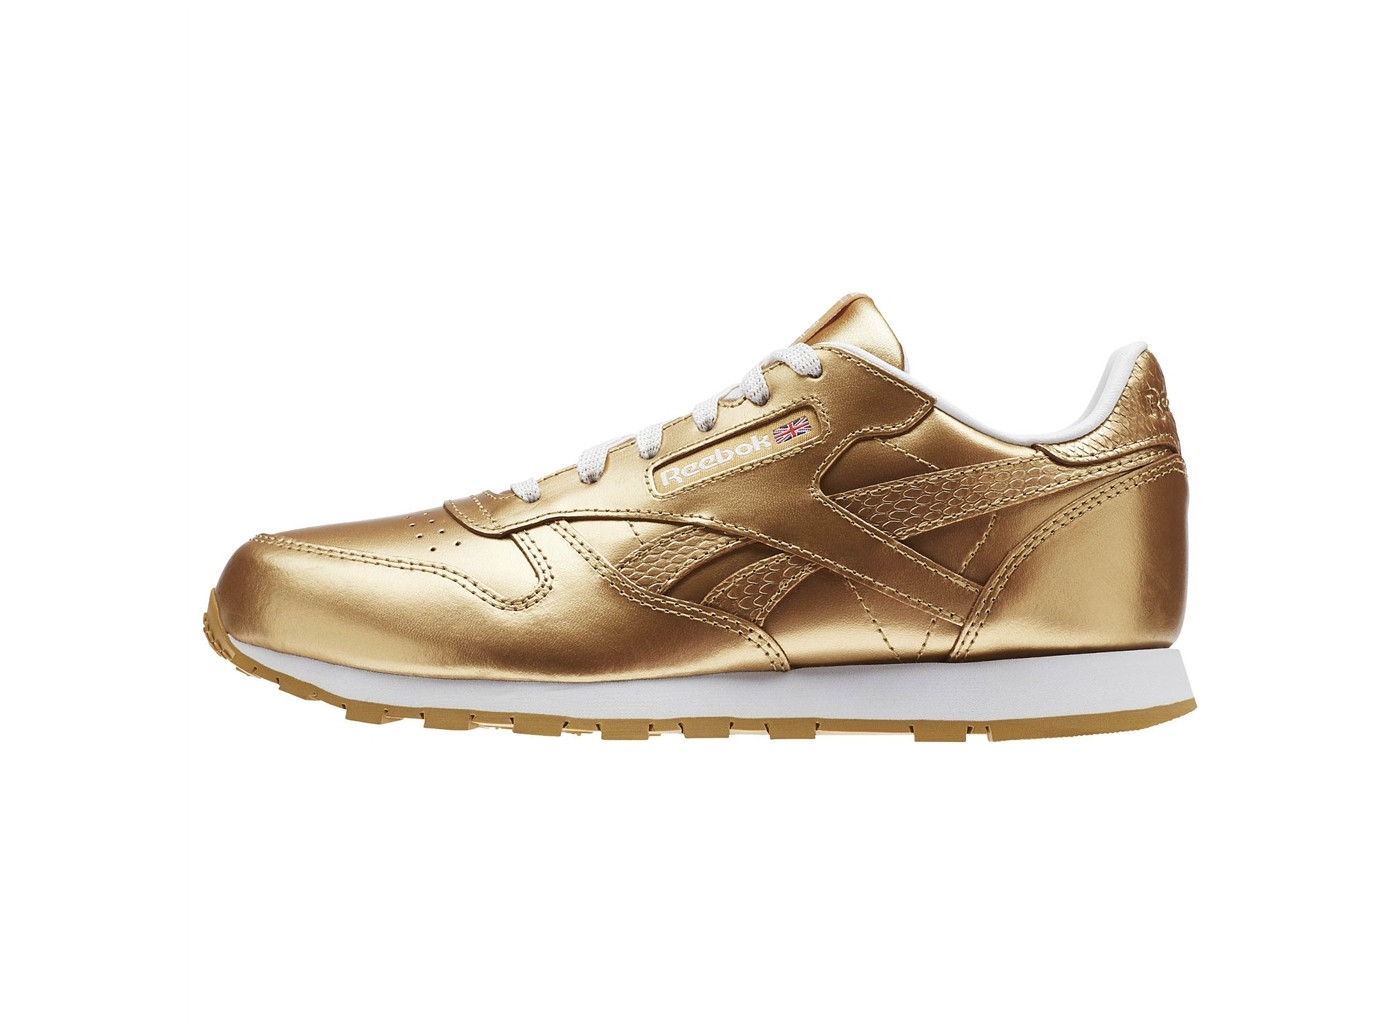 reebok classic leather femme or